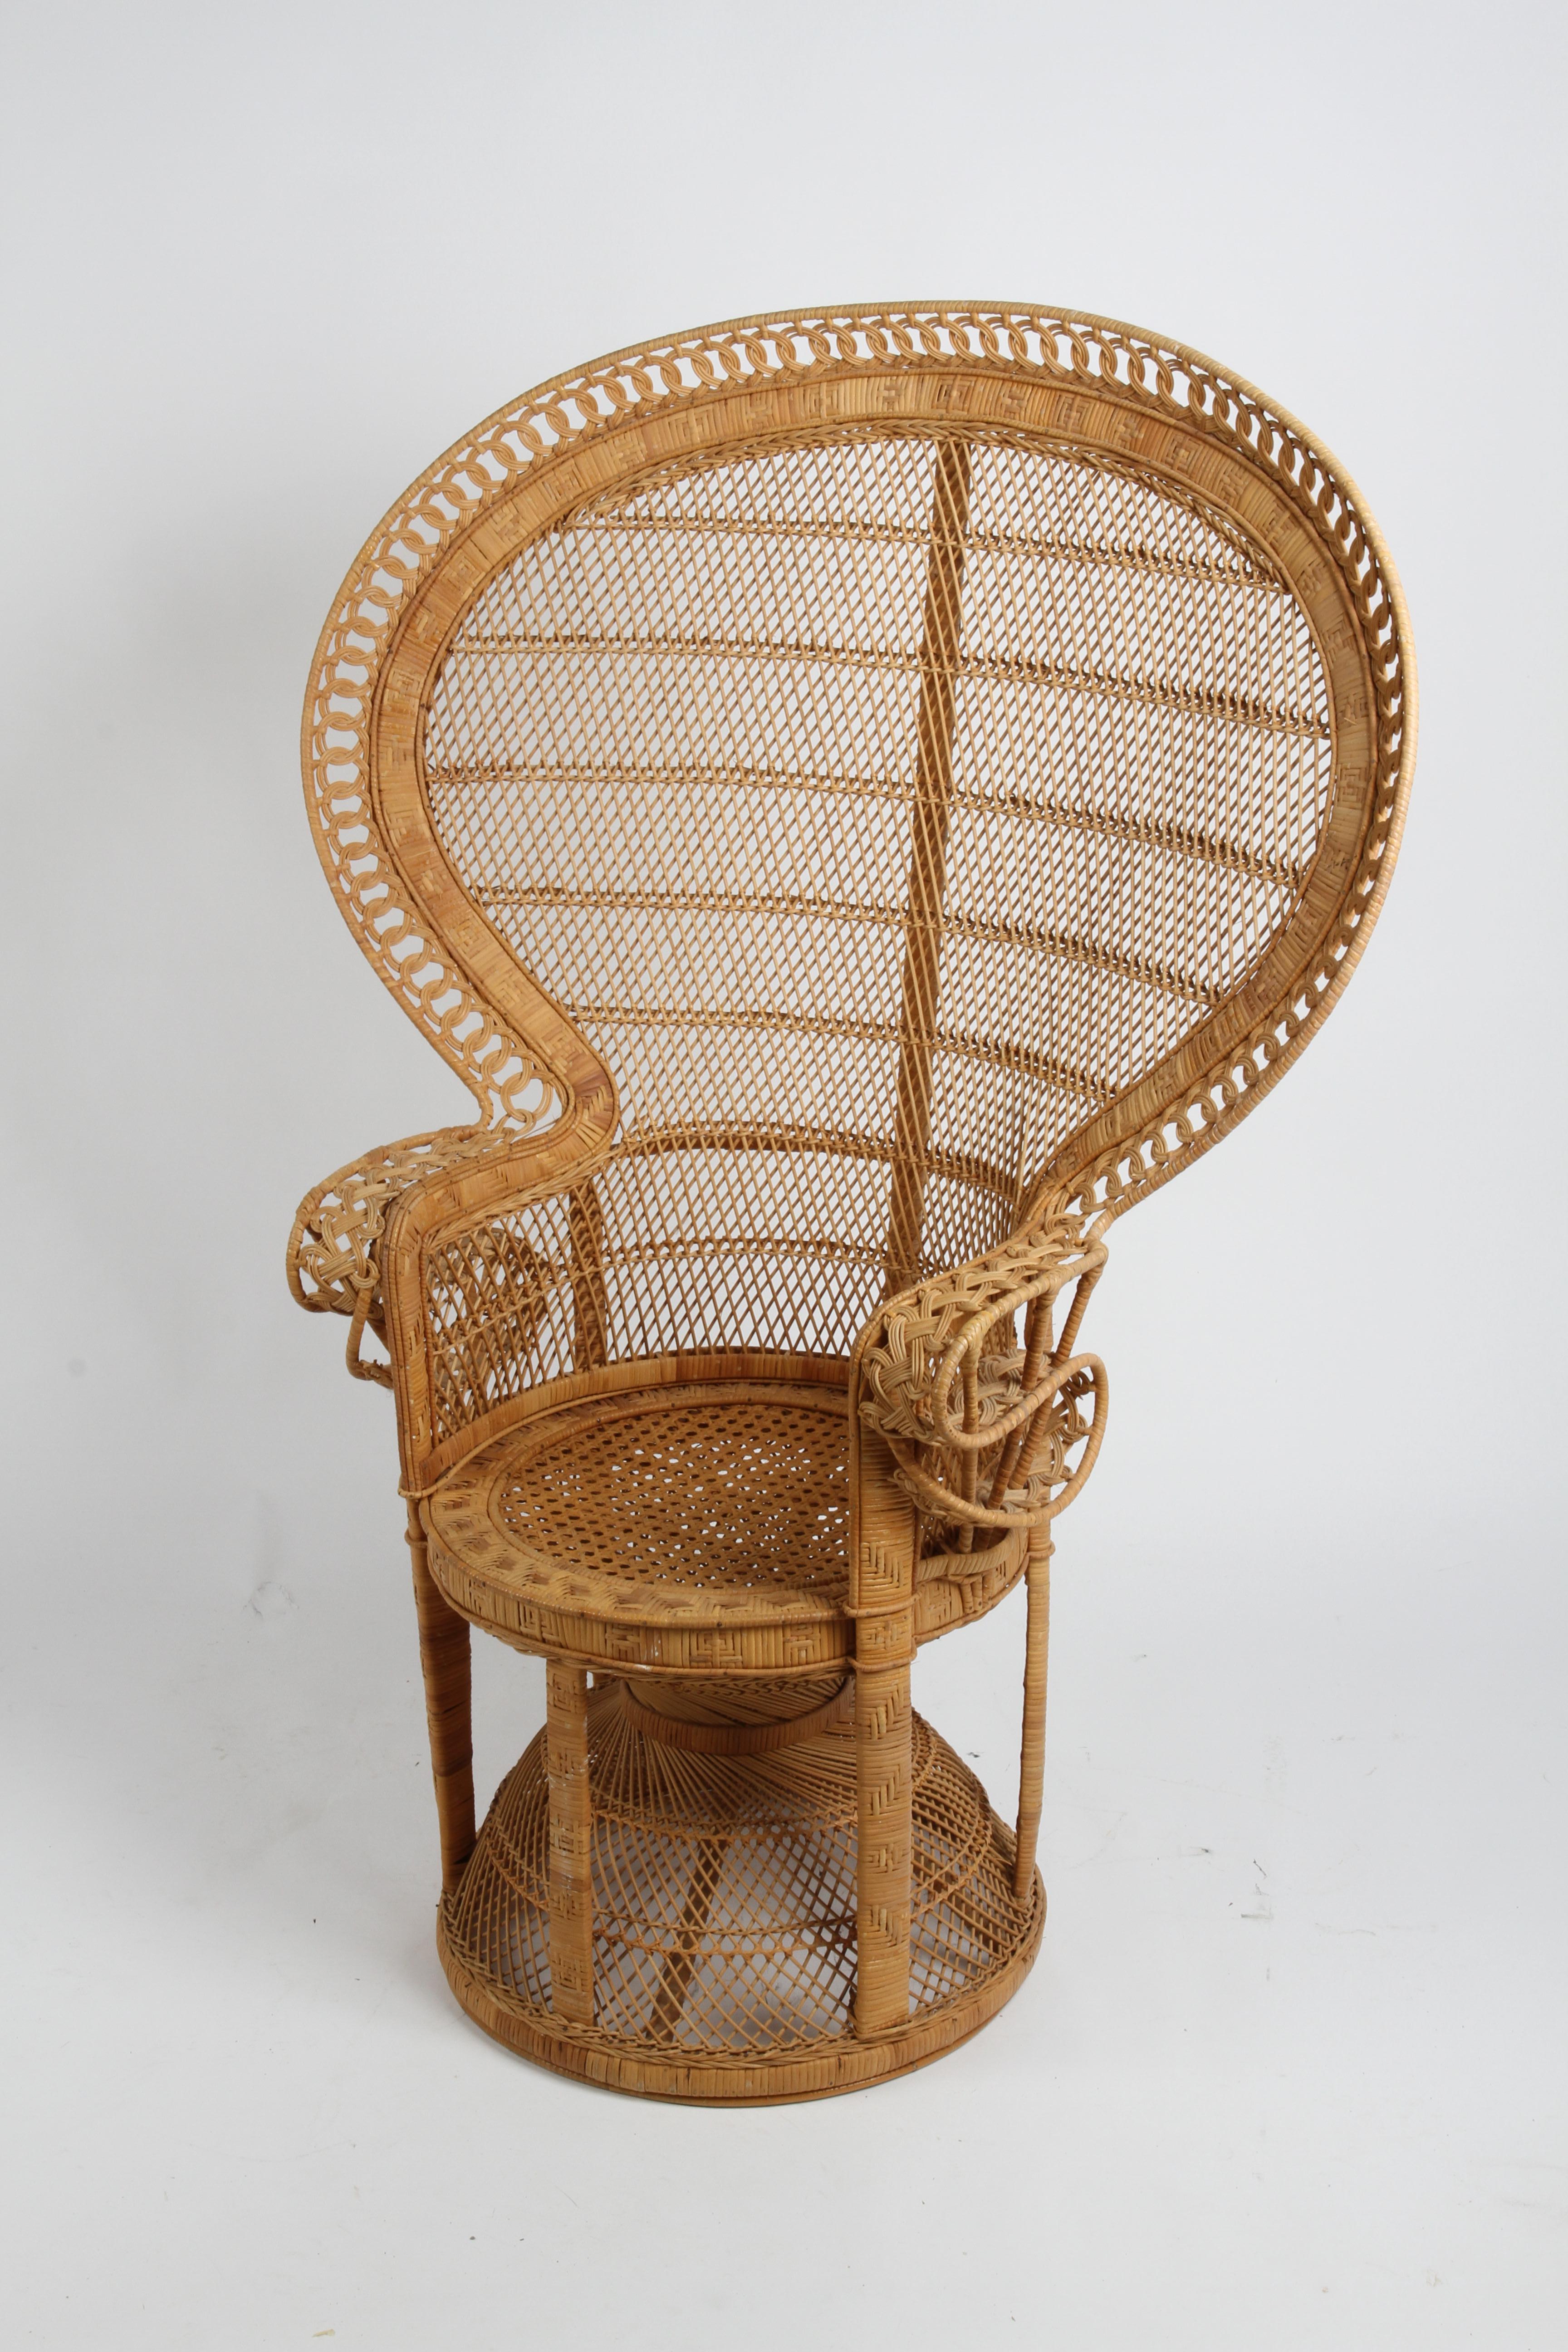 Vintage 1970s Rattan & Wicker Handcrafted Boho Chic Emmanuelle Peacock Chair For Sale 7